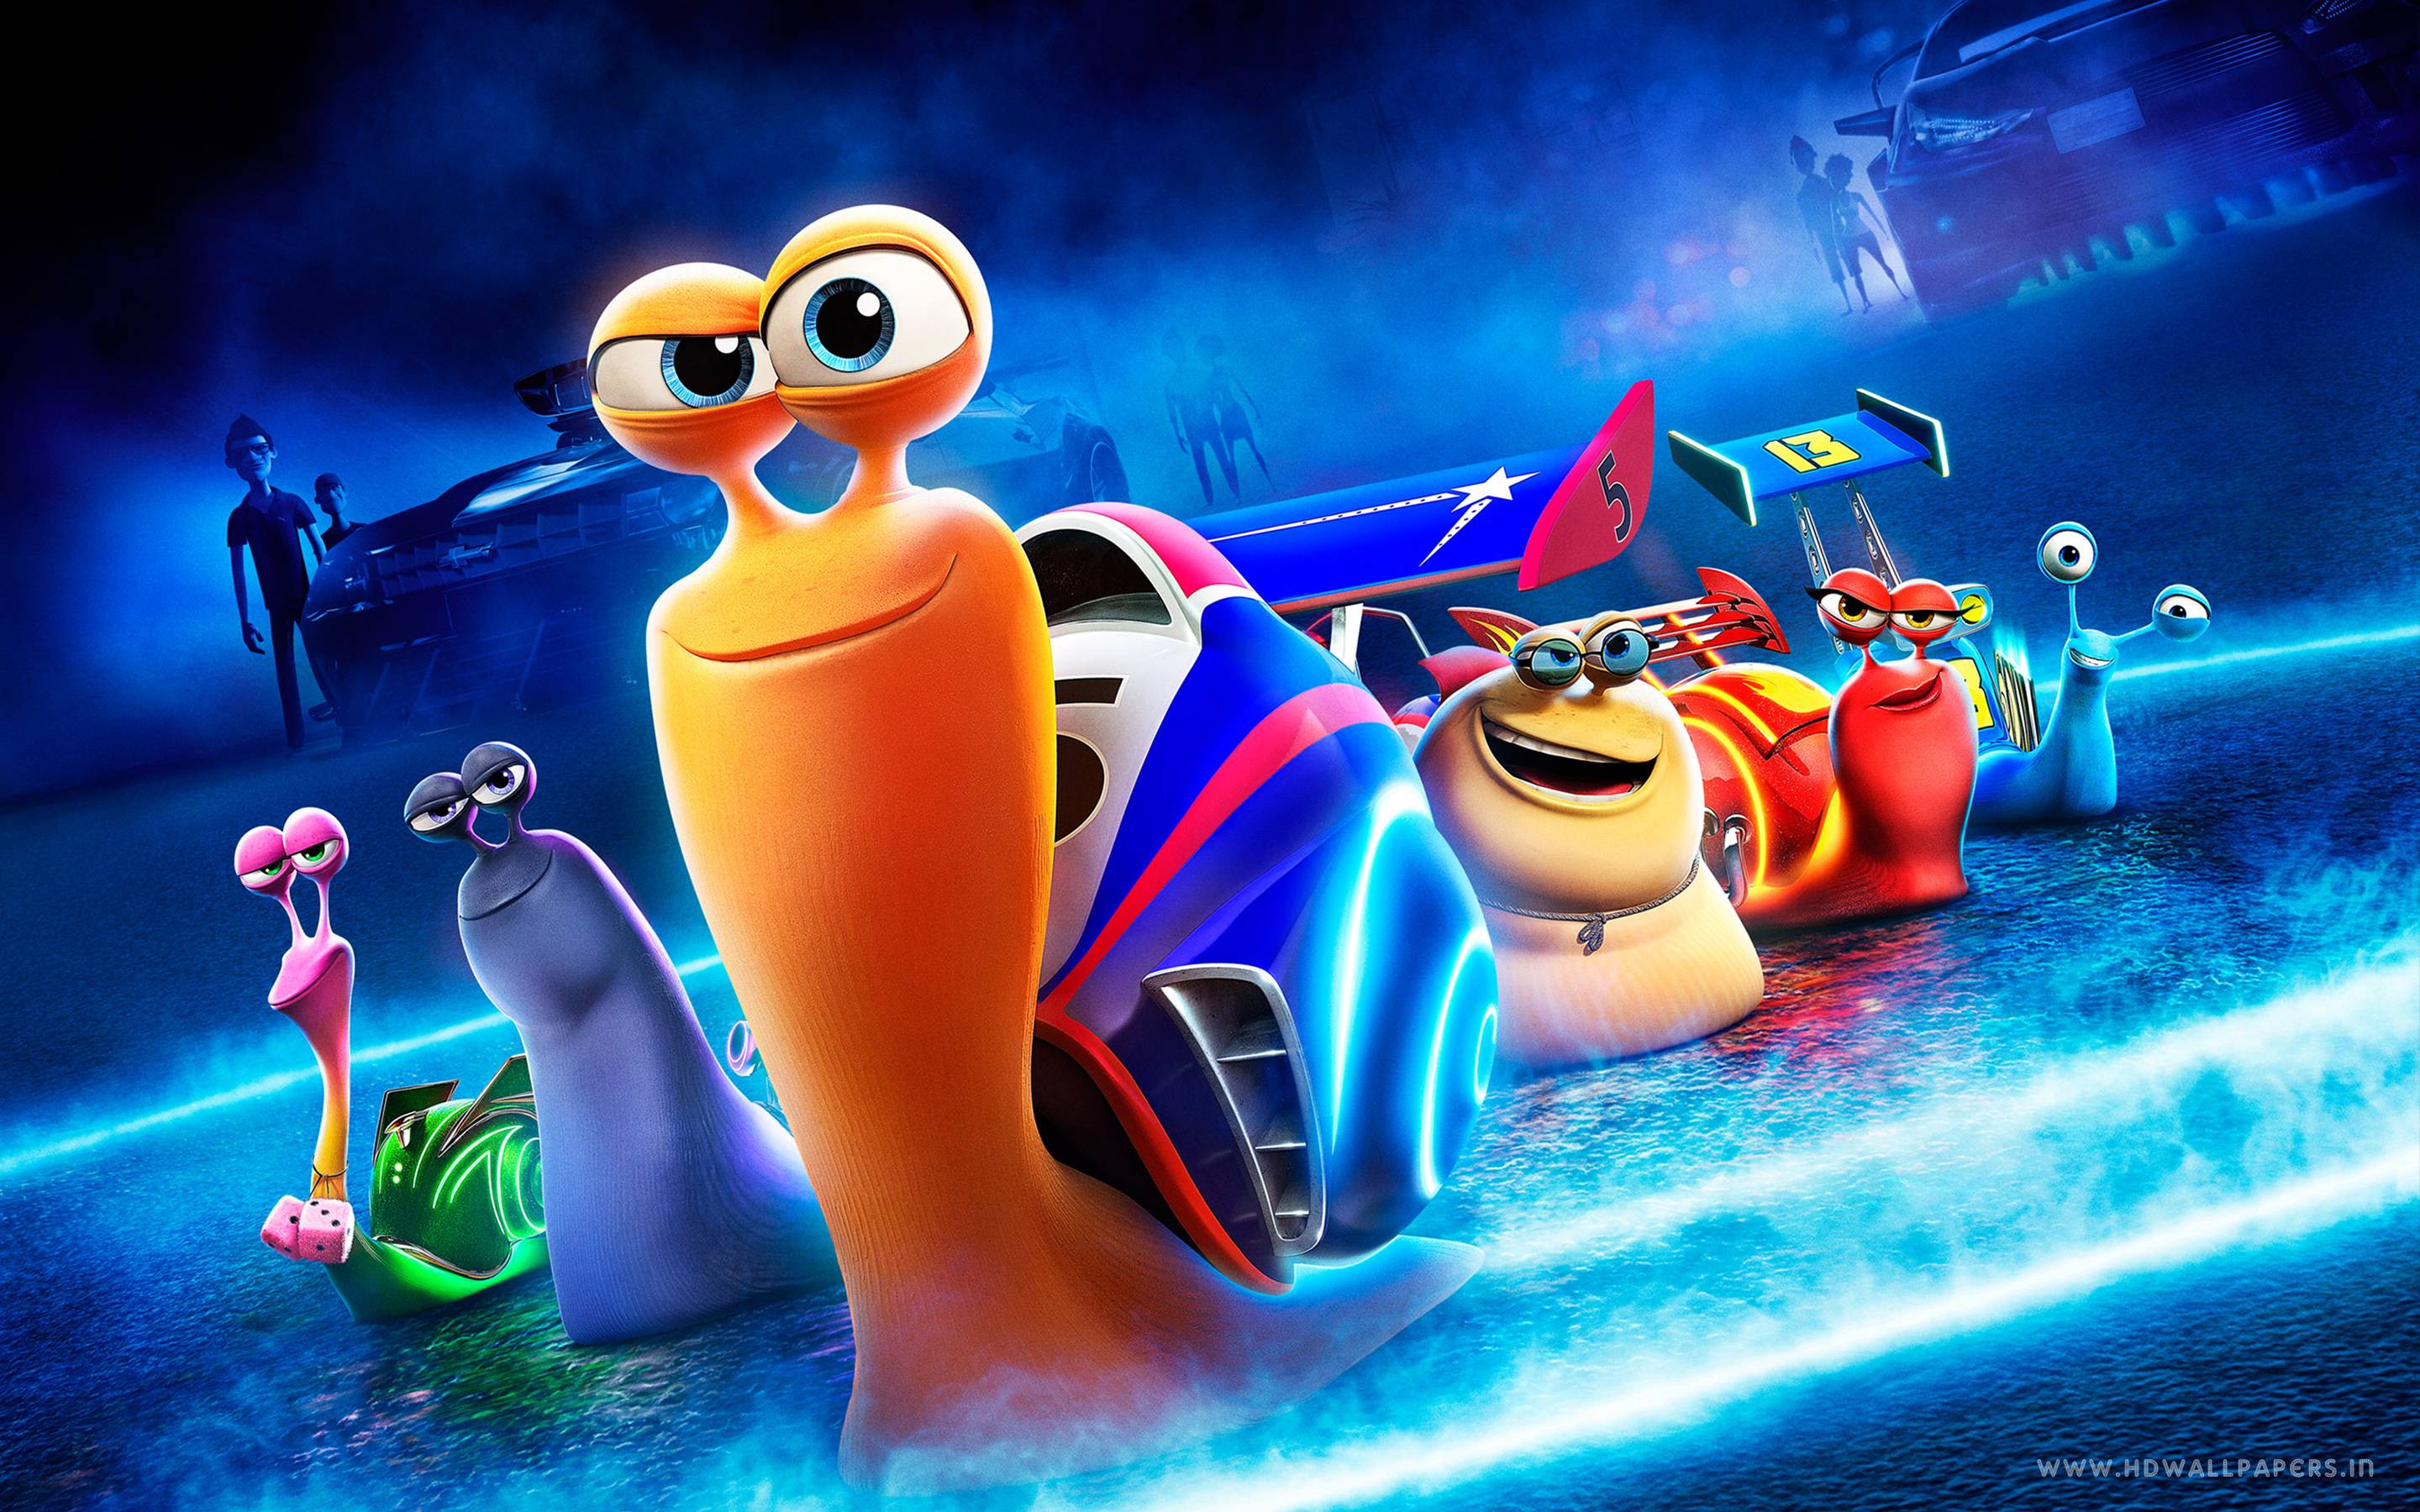 HD Wallpaper of 2013 Animation Movies